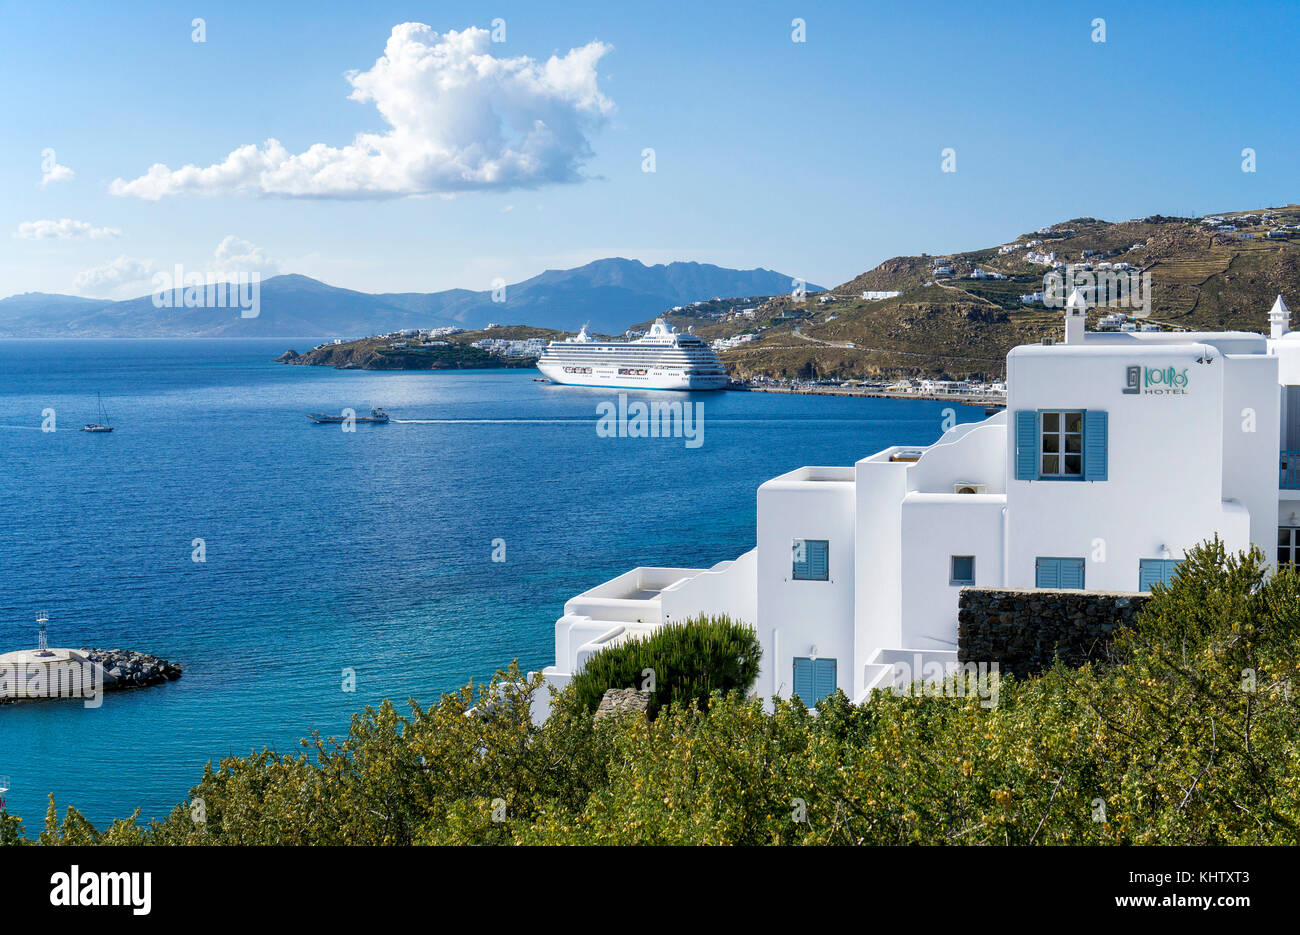 View from typical cyclade cube house on new harbour with cruise ship, Mykonos island, Cyclades, Aegean, Greece Stock Photo